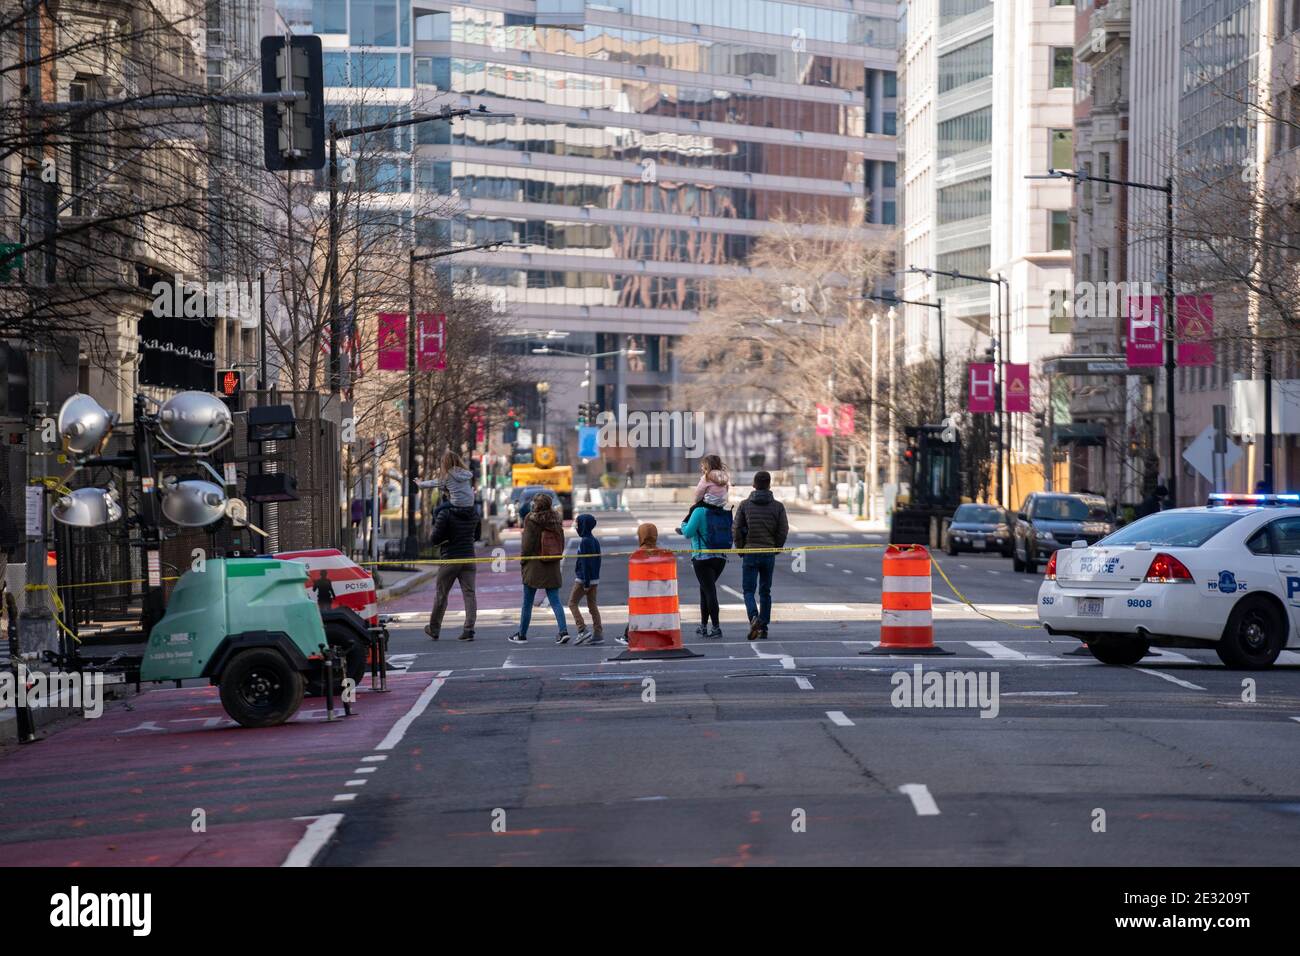 A family walks among closed off streets ahead of inaugural security ahead of the upcoming inauguration for President Joe Biden January 16, 2021 in Washington DC. Security is even tighter given there recent events when pro-Trump MAGA mobs breached the security perimeter and penetrated the U.S. Capitol back on Jan 6. Photo by Ken Cedeno/Pool/ABACAPRESS.COM Stock Photo